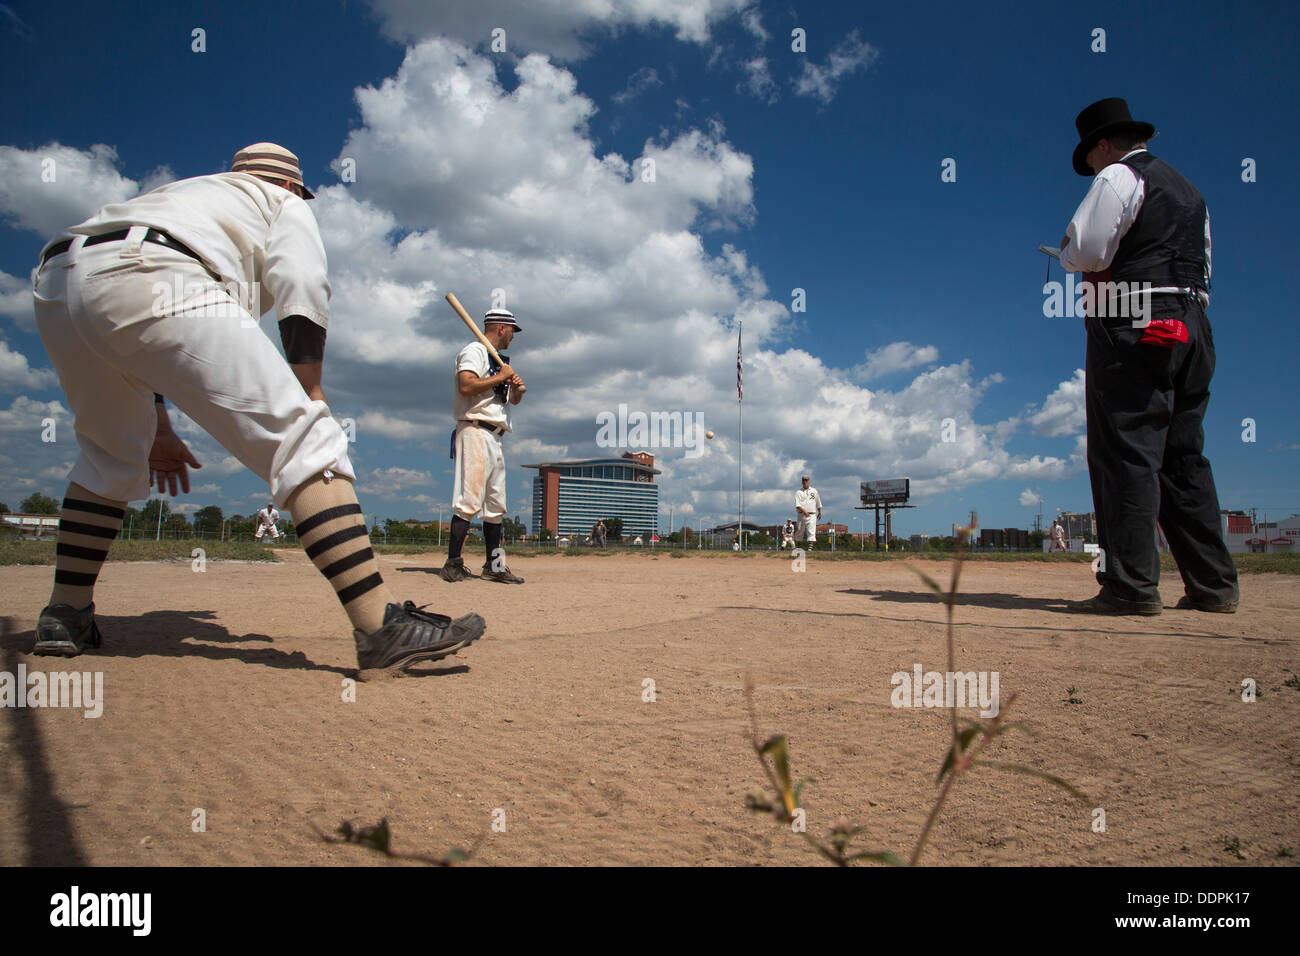 Detroit, Michigan - A vintage base ball game between the Wyandotte Stars and the Saginaw Old Golds, using rules from the 1860's. Stock Photo